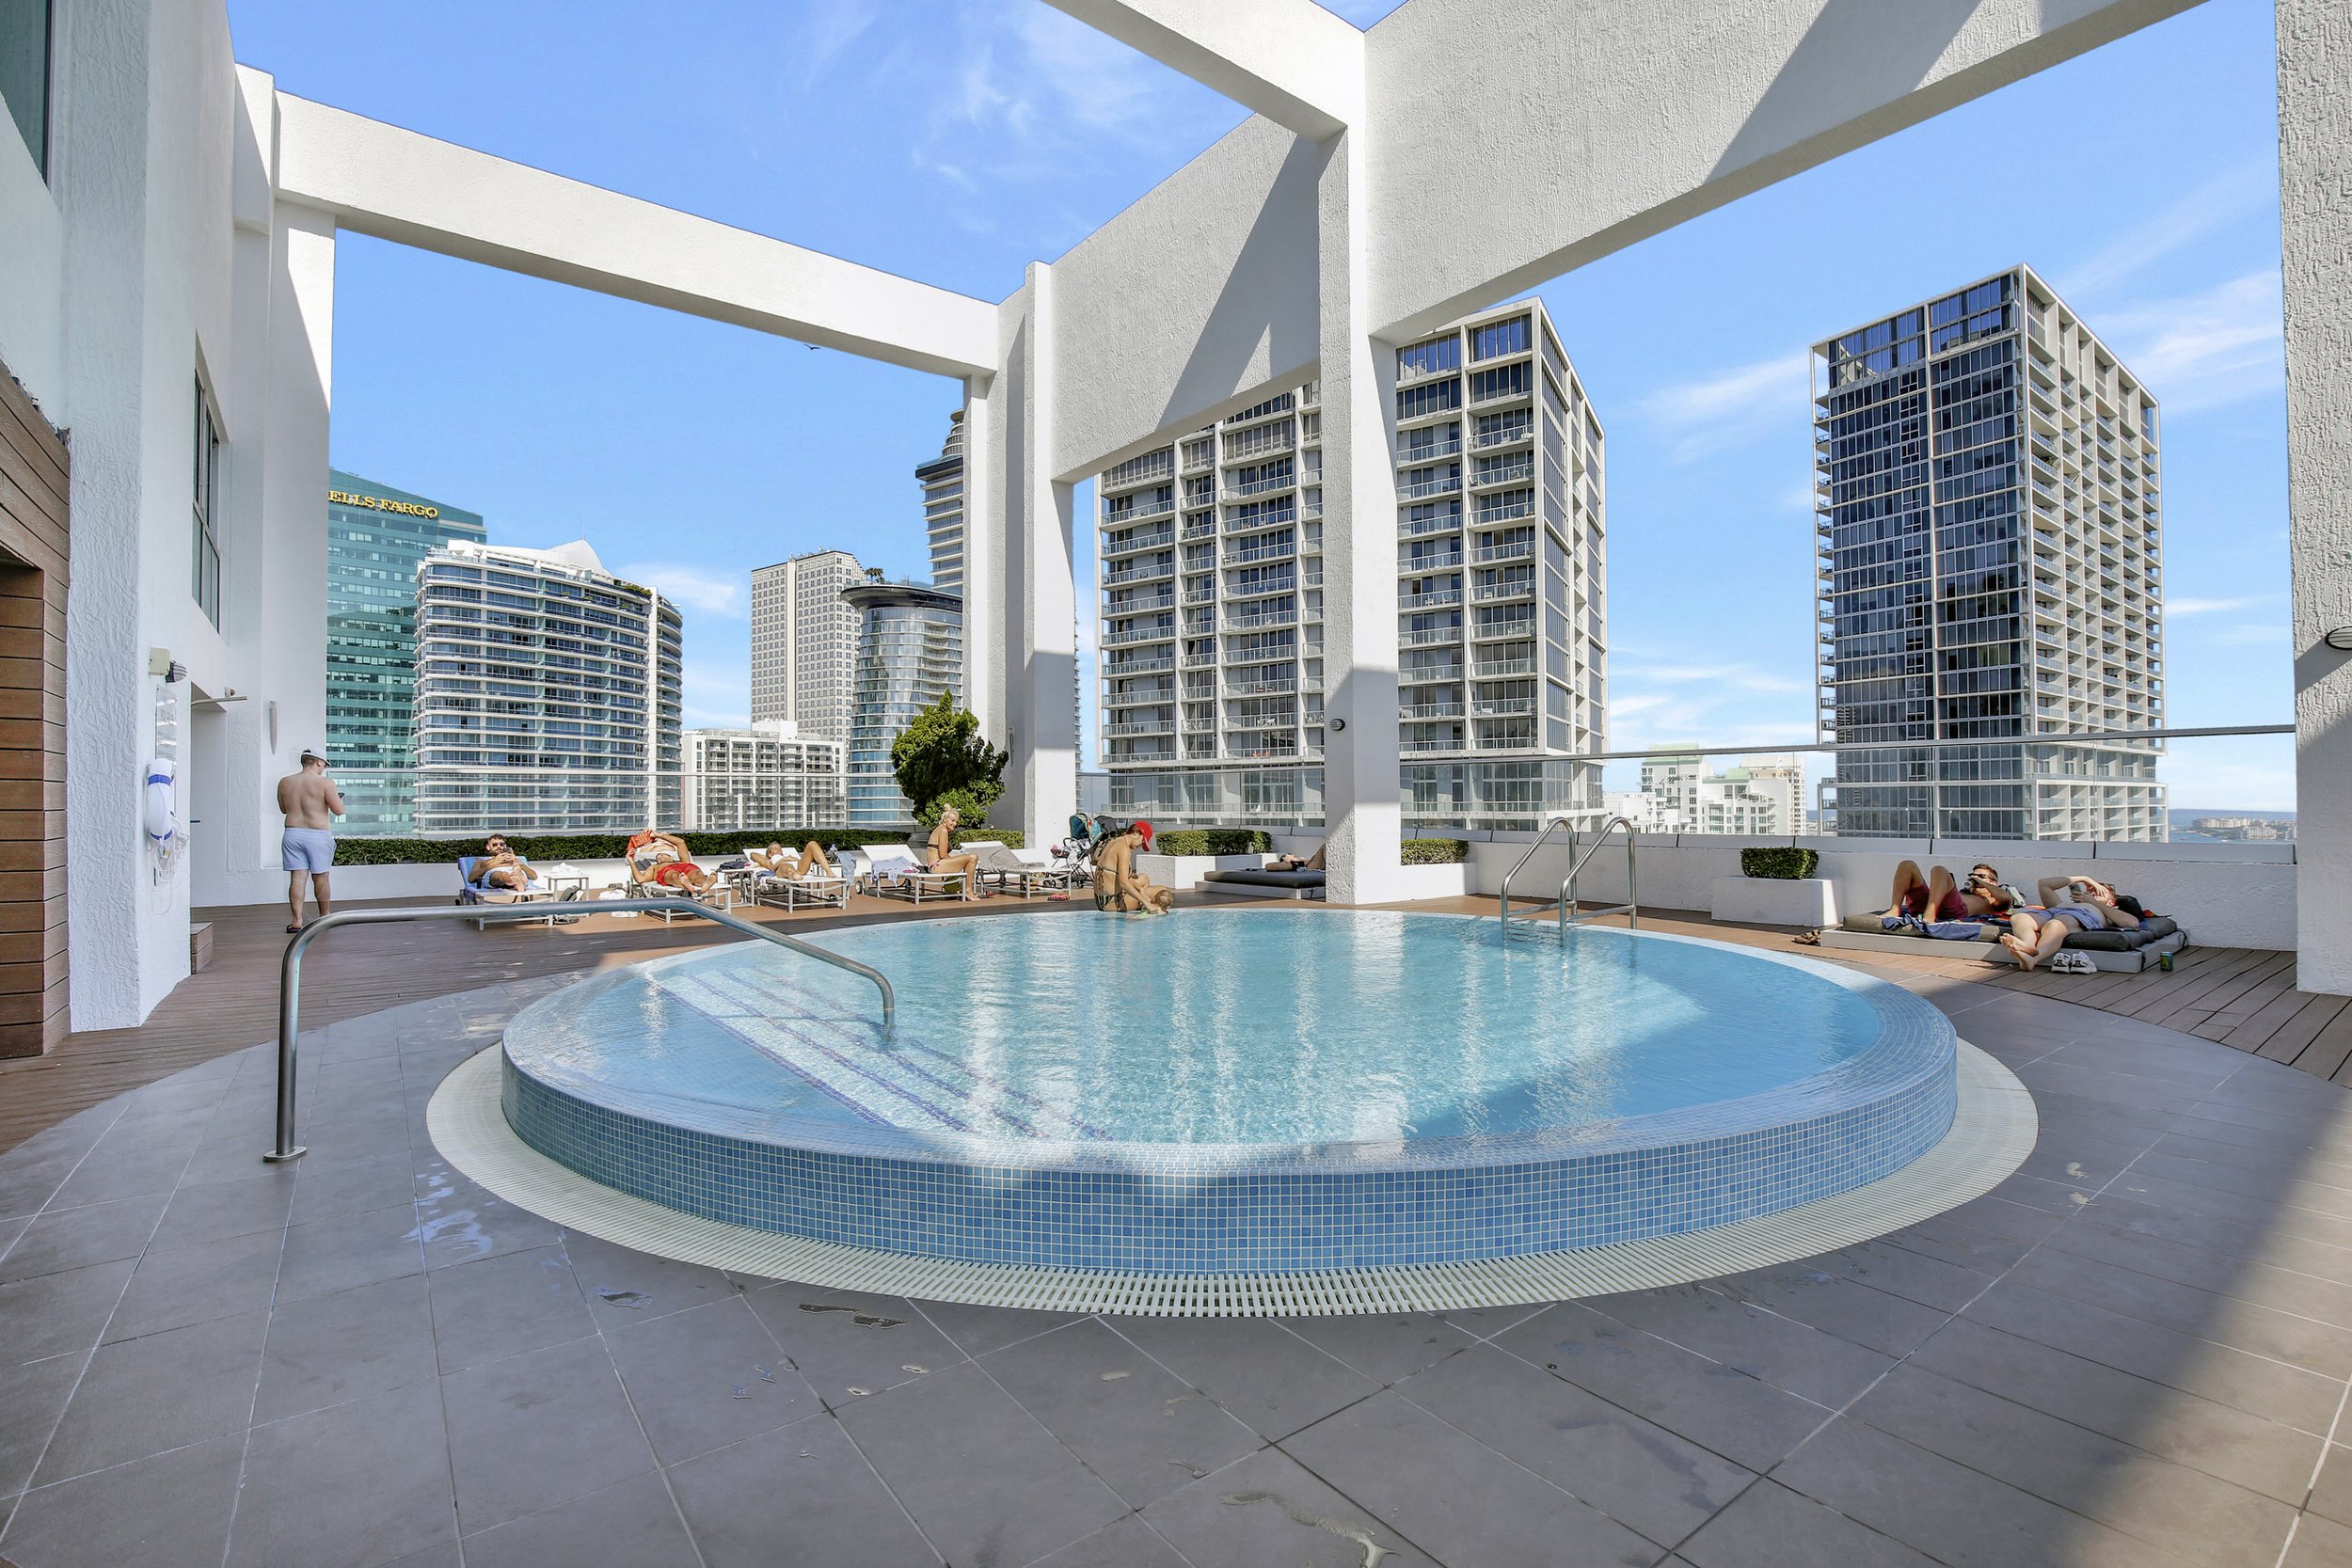 Check Out This Two-Bedroom Condo For Under $900K In Brickell 42.jpg